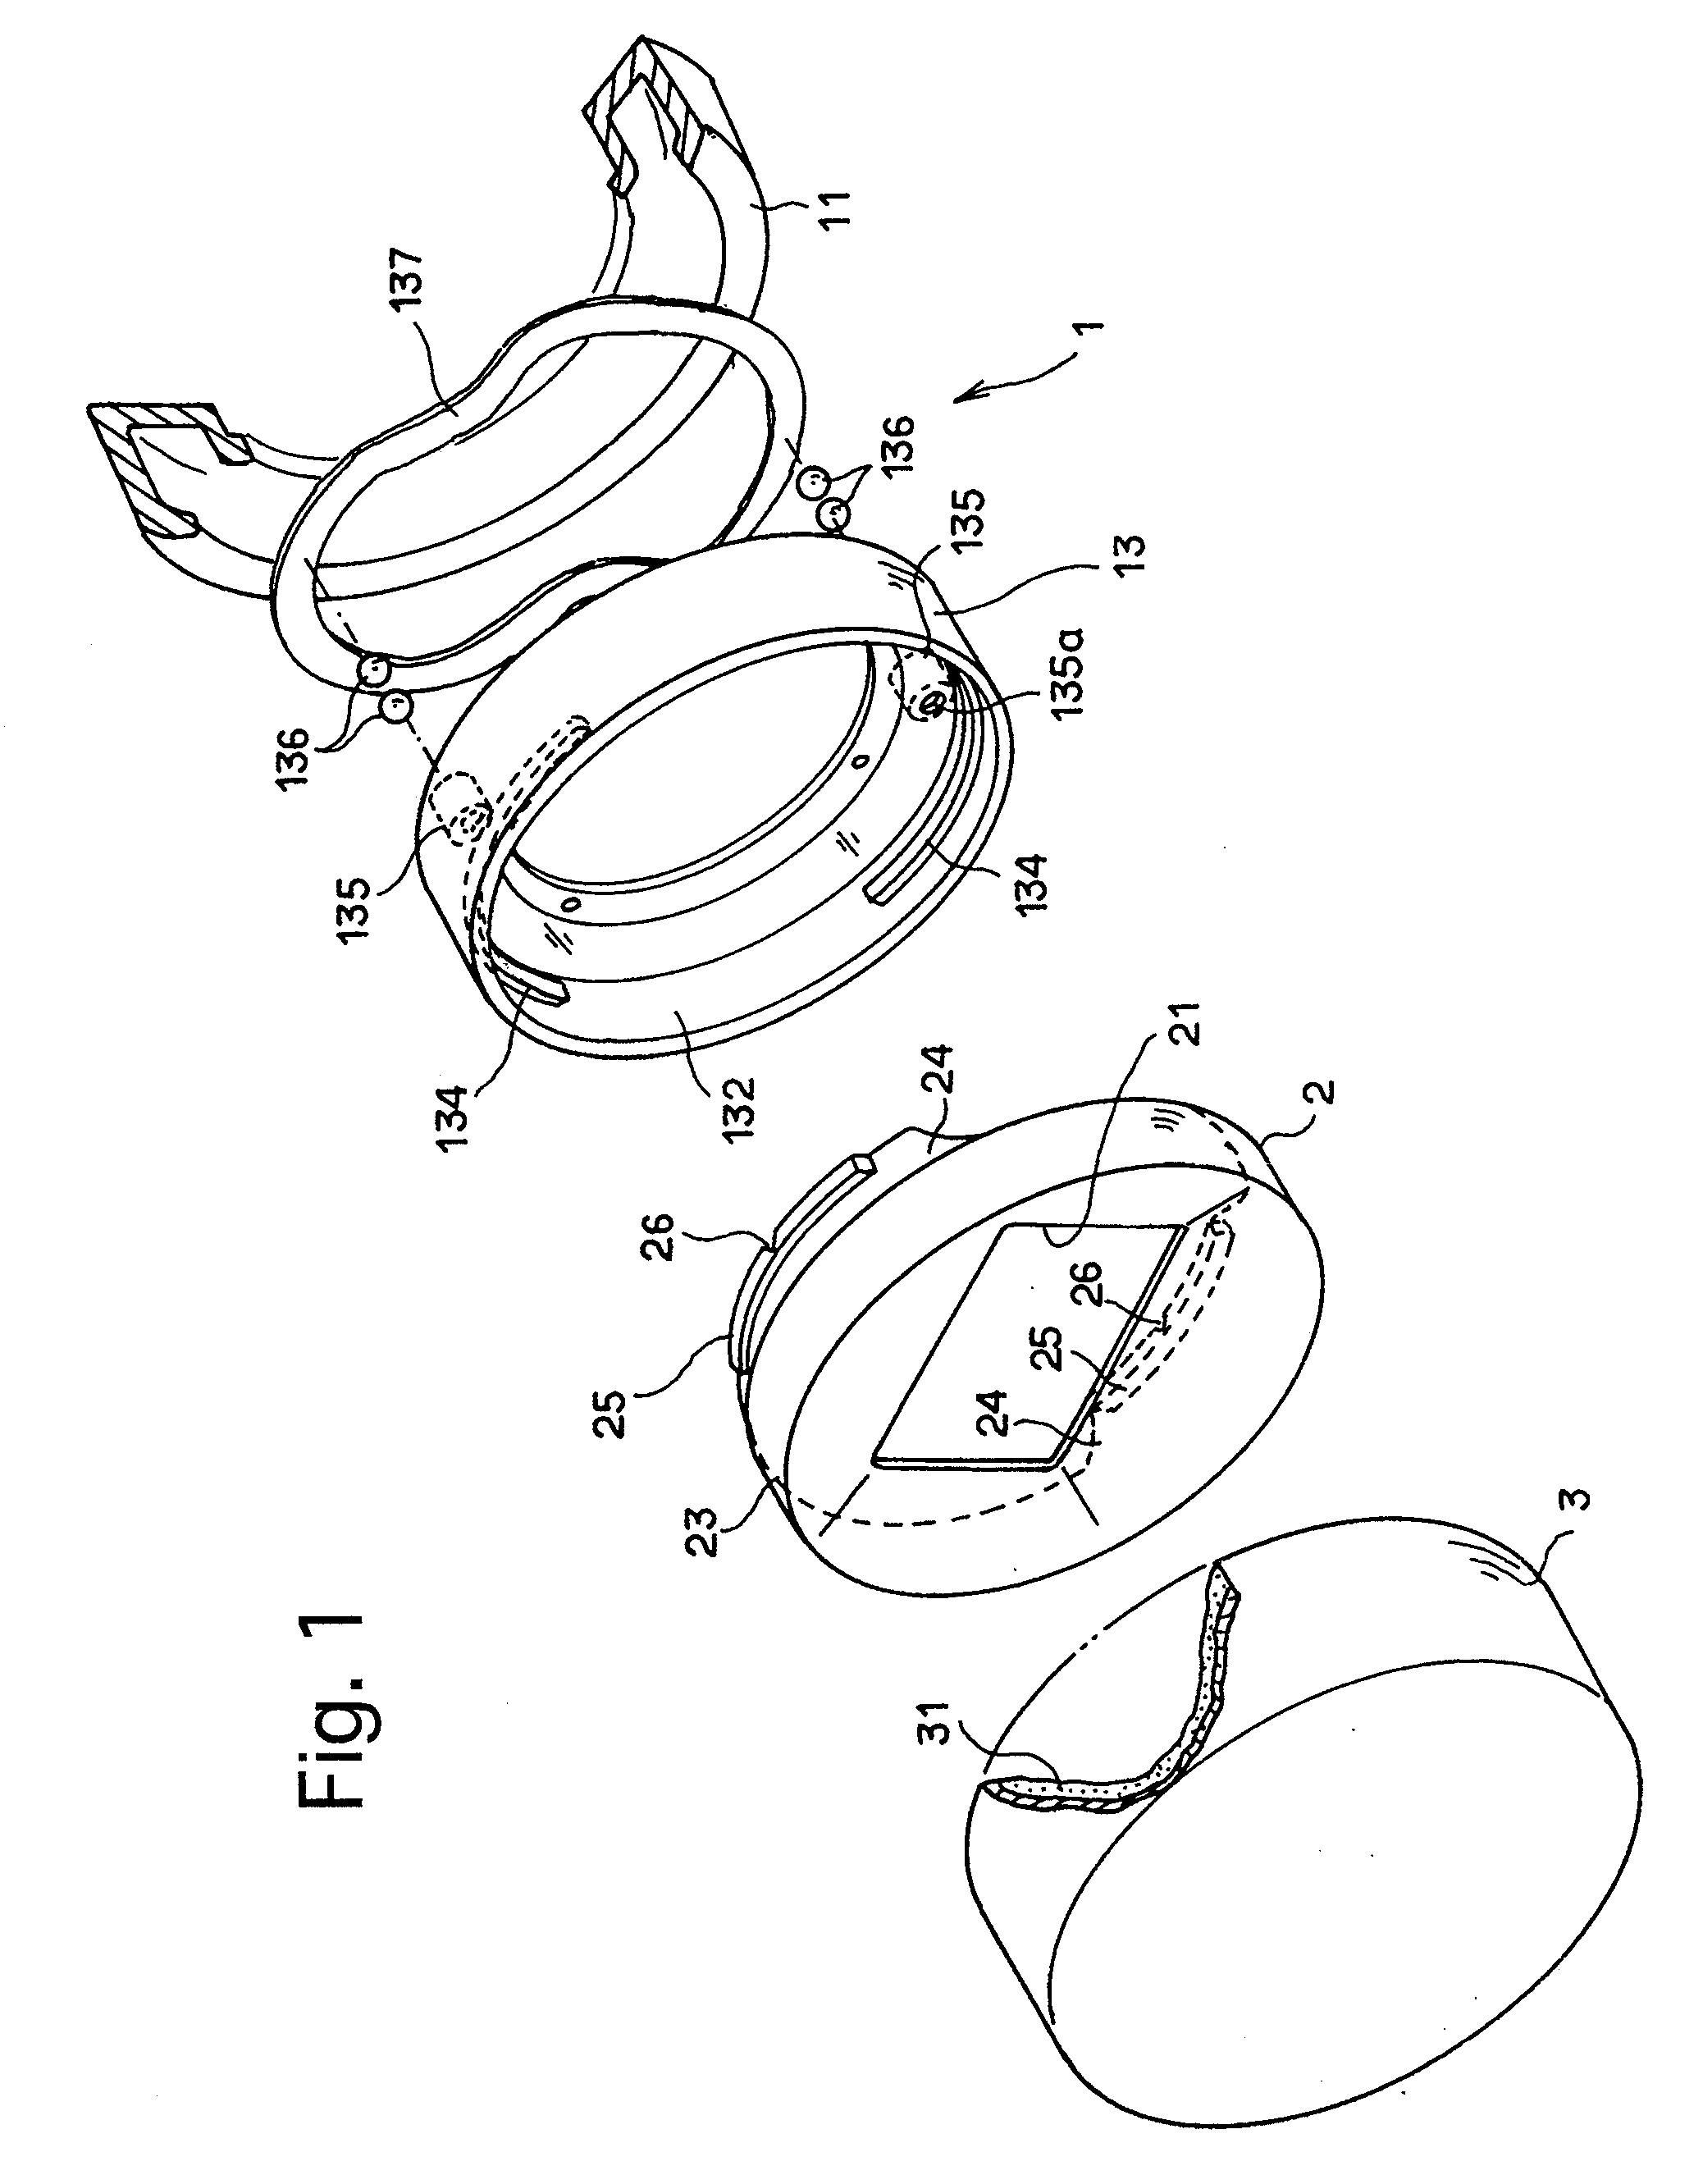 Lens accessory mounting device